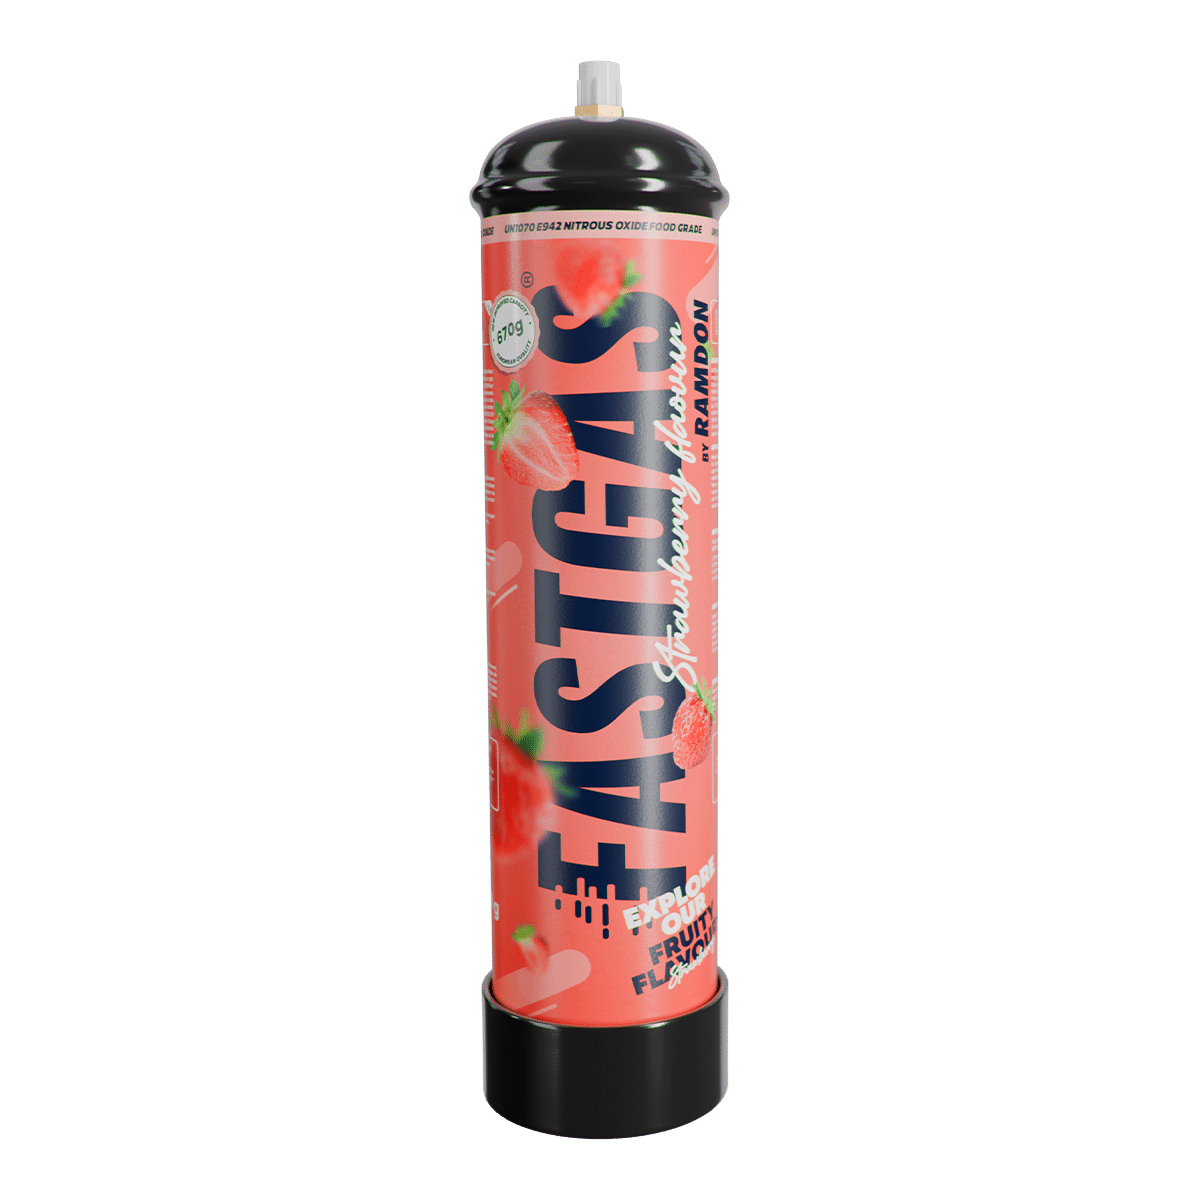 FastGas Strawberry Nitrous Oxide Cylinder 670 grams